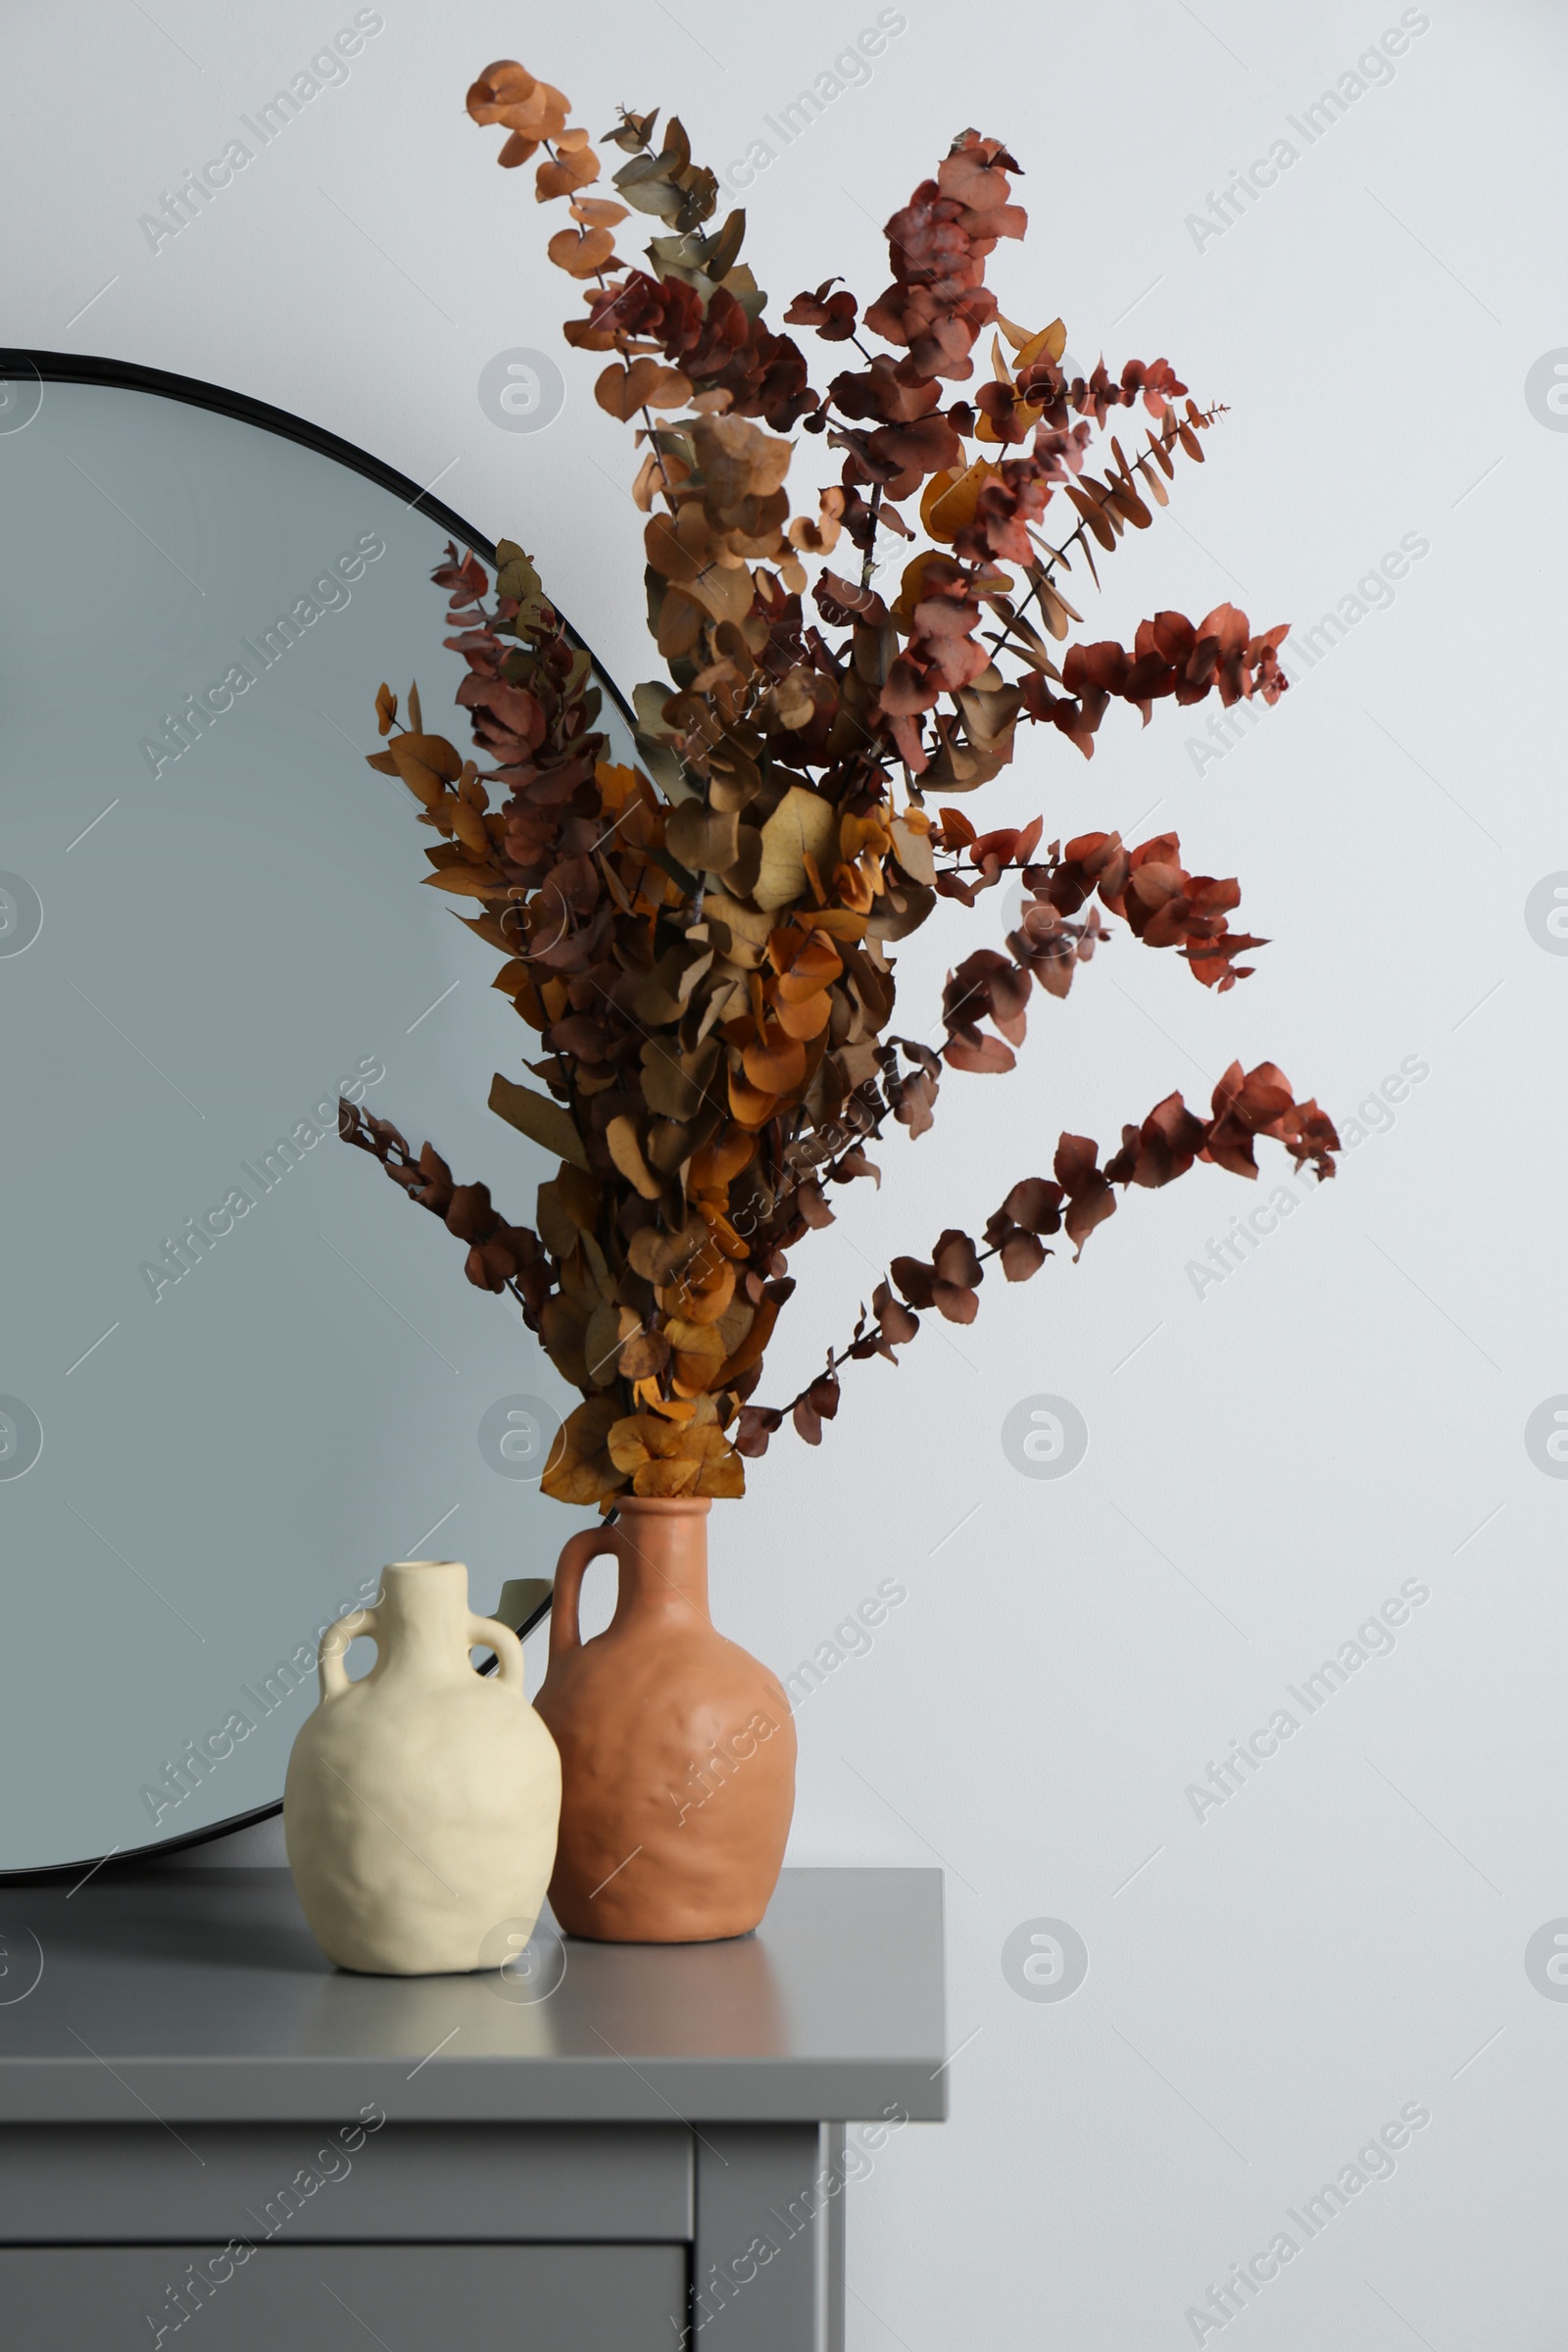 Photo of Vases, dried eucalyptus branches and stylish round mirror on grey table near white wall indoors. Interior design